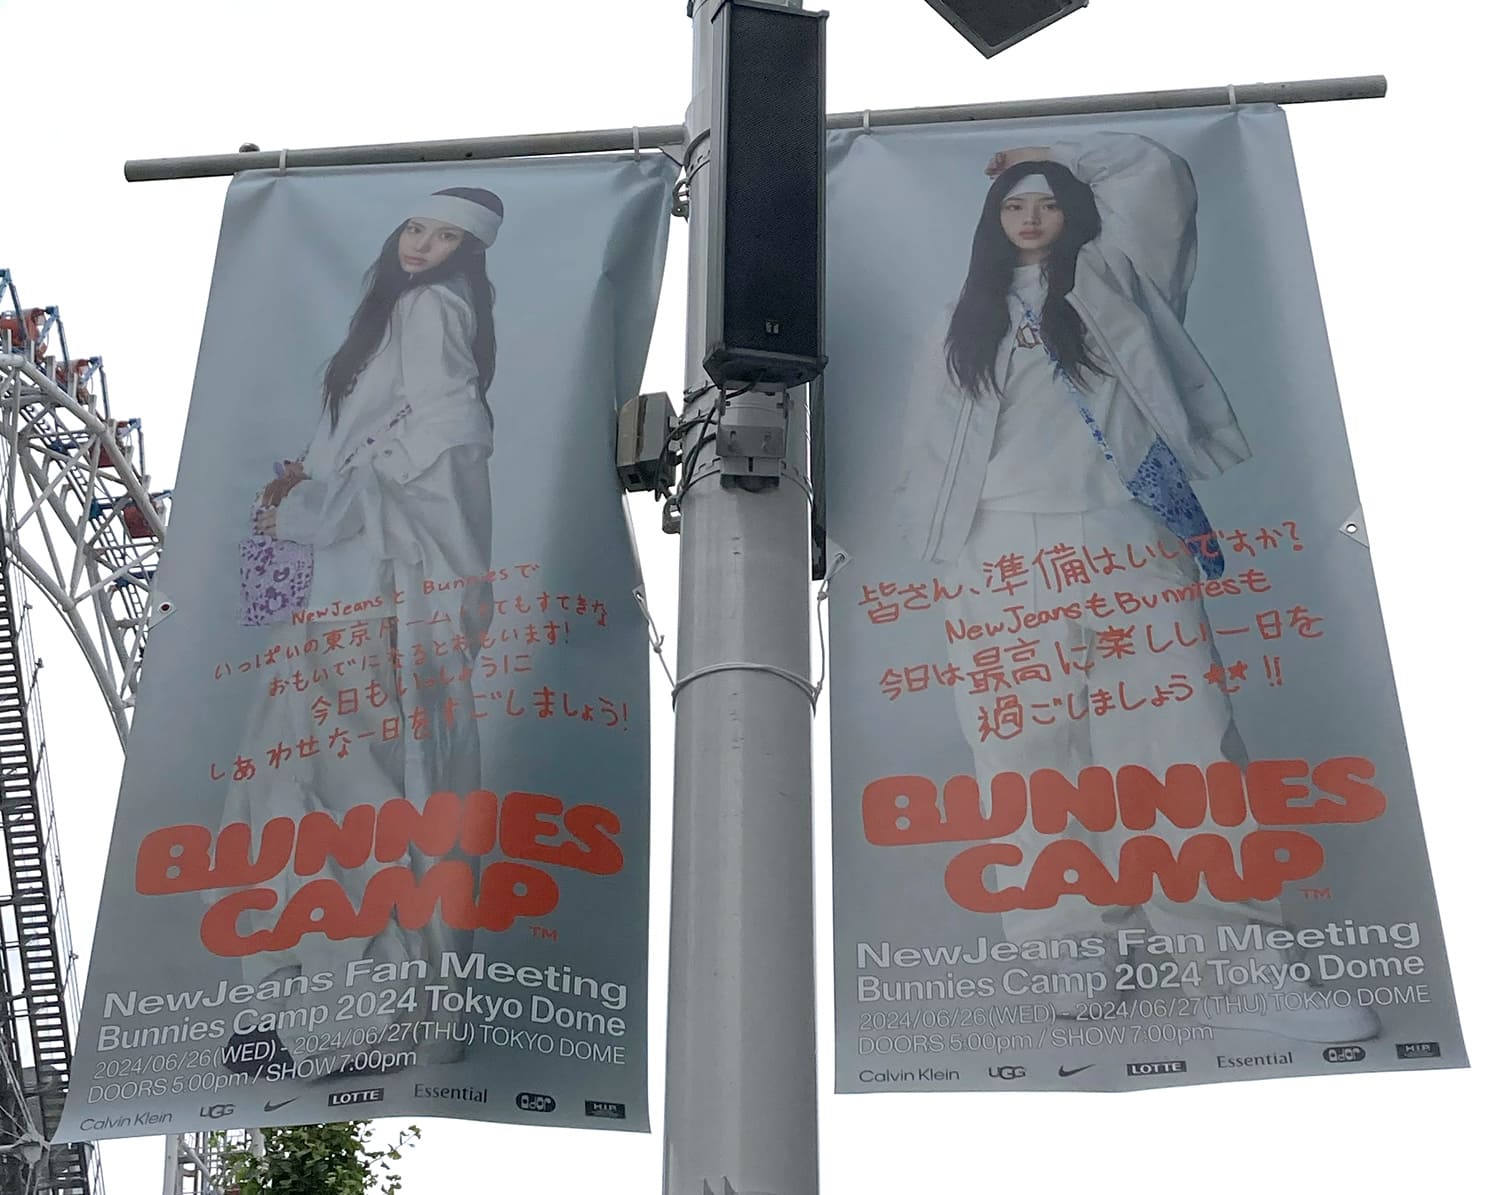 NewJeans Bunnies Camp 2024 Tokyo Dome